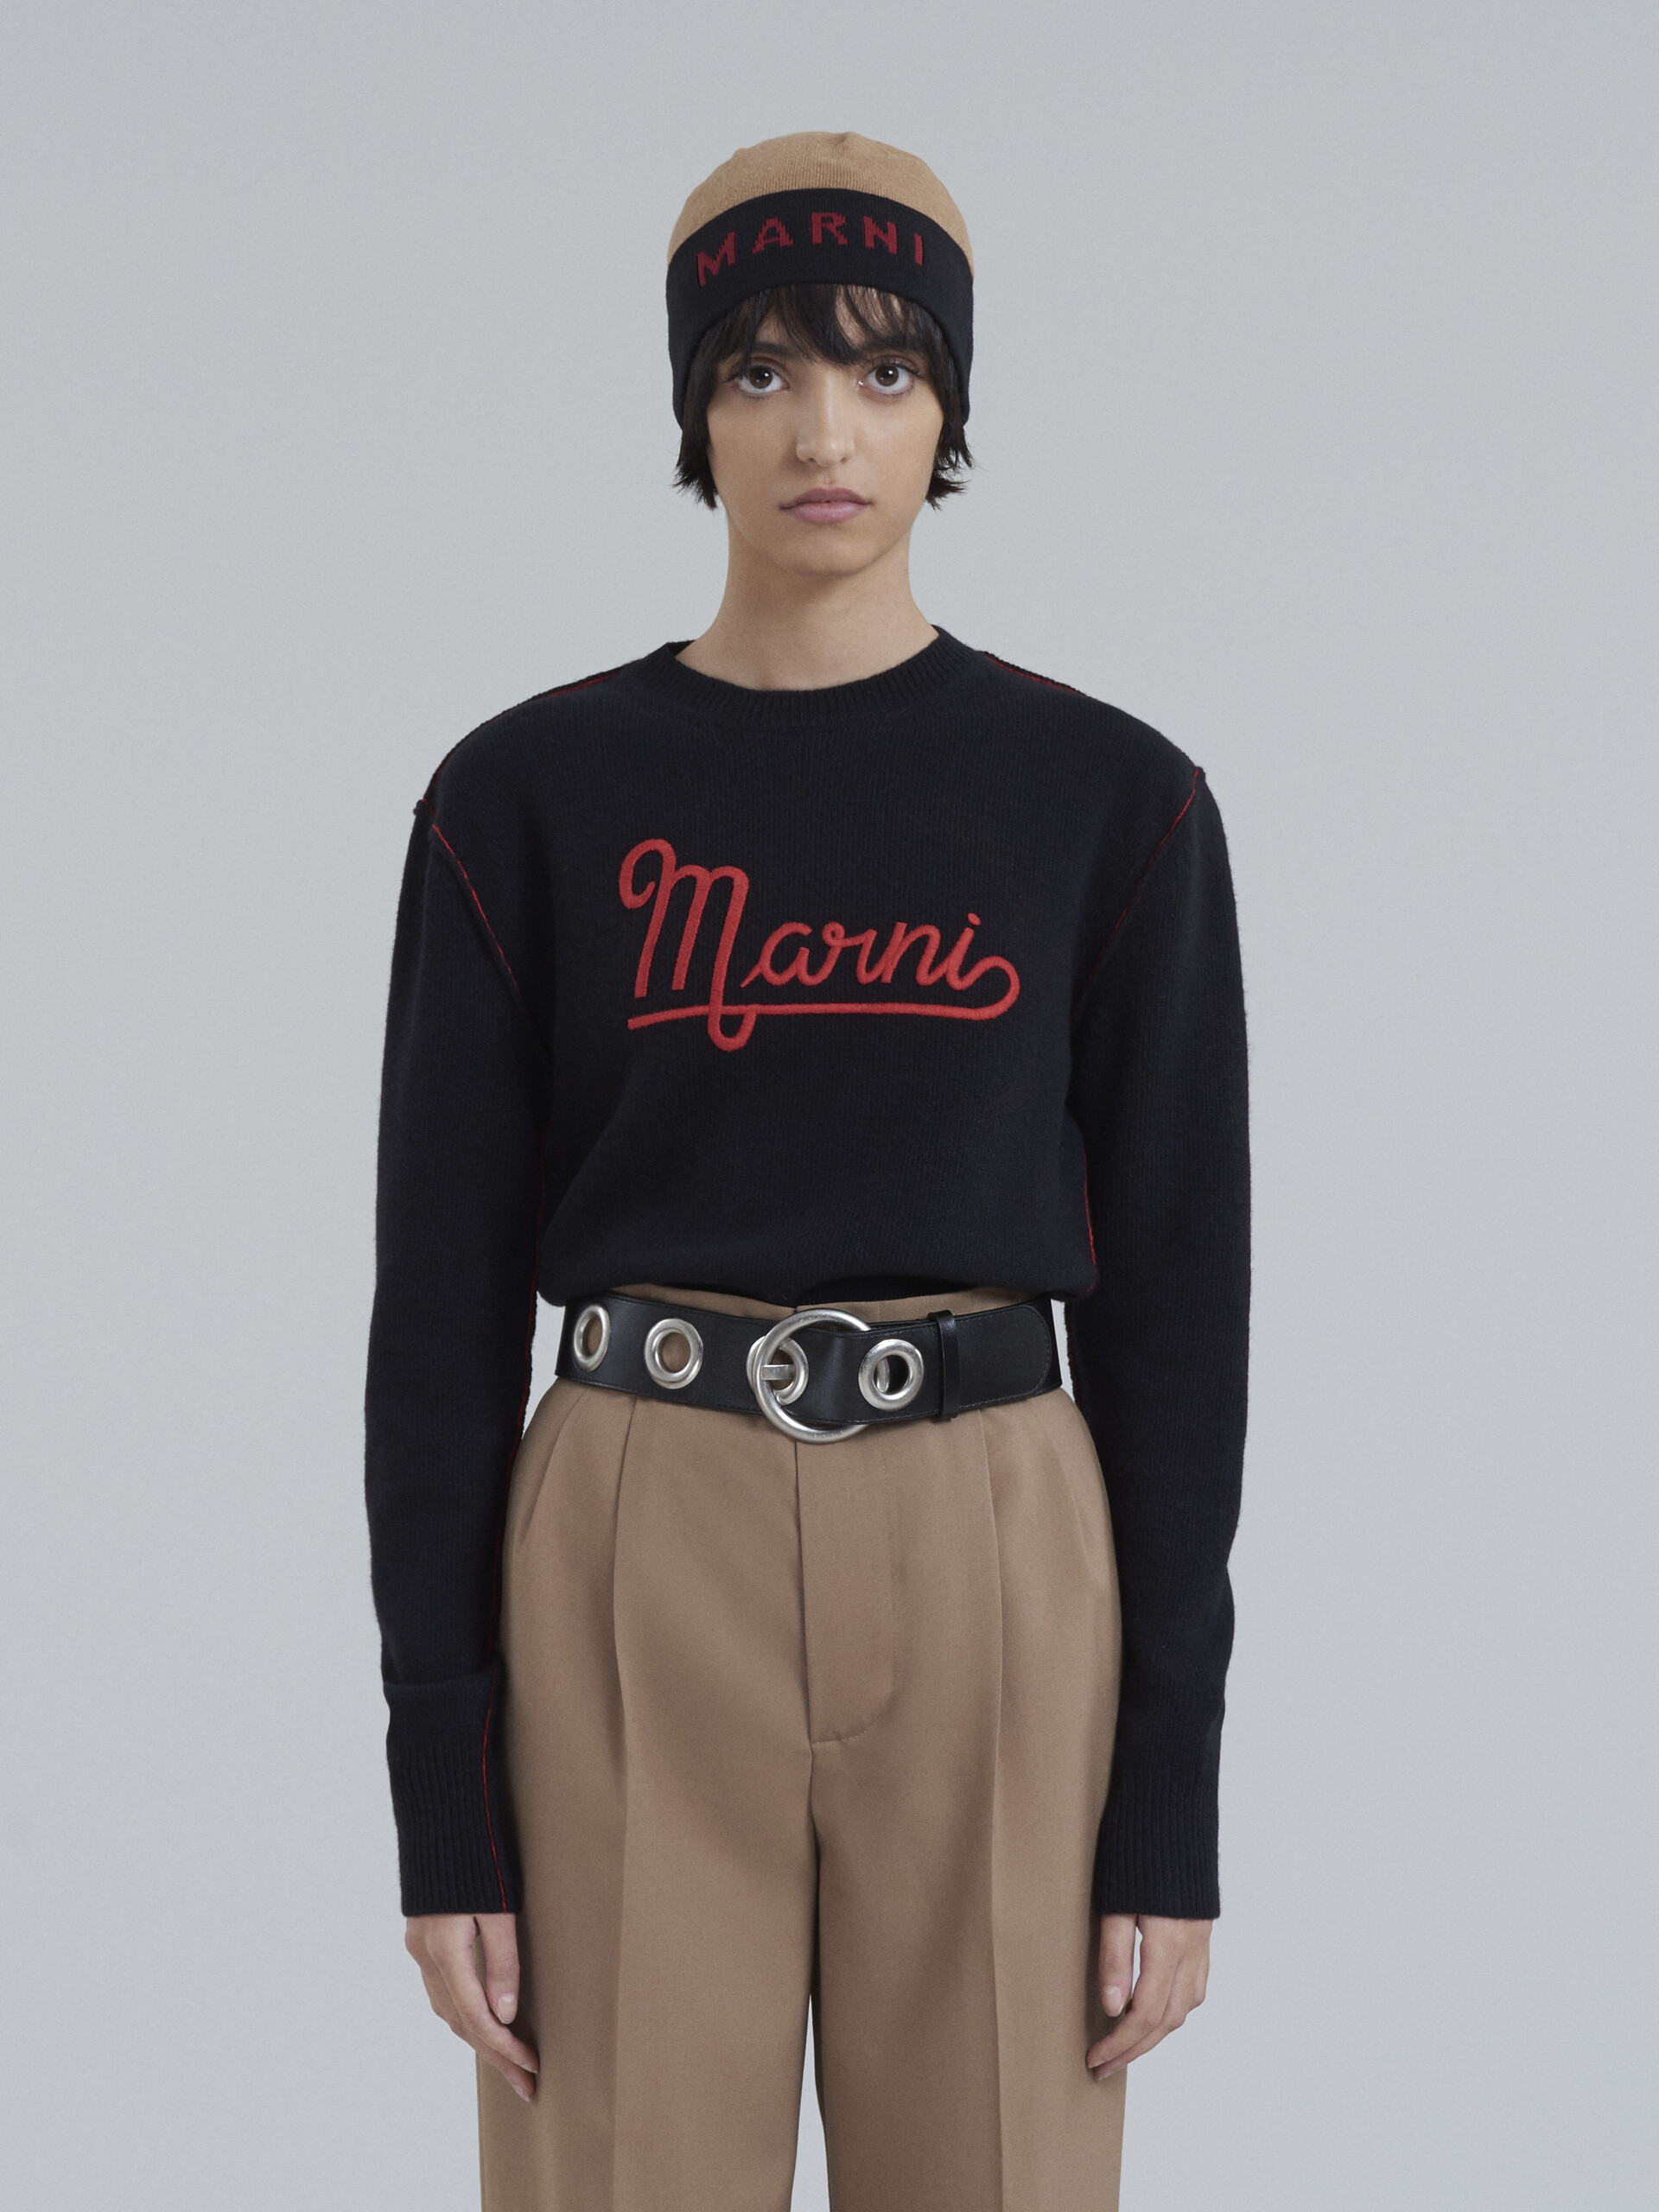 Black Shetland wool long-sleeved sweater with embroidered Marni logo - Pullovers - Image 2